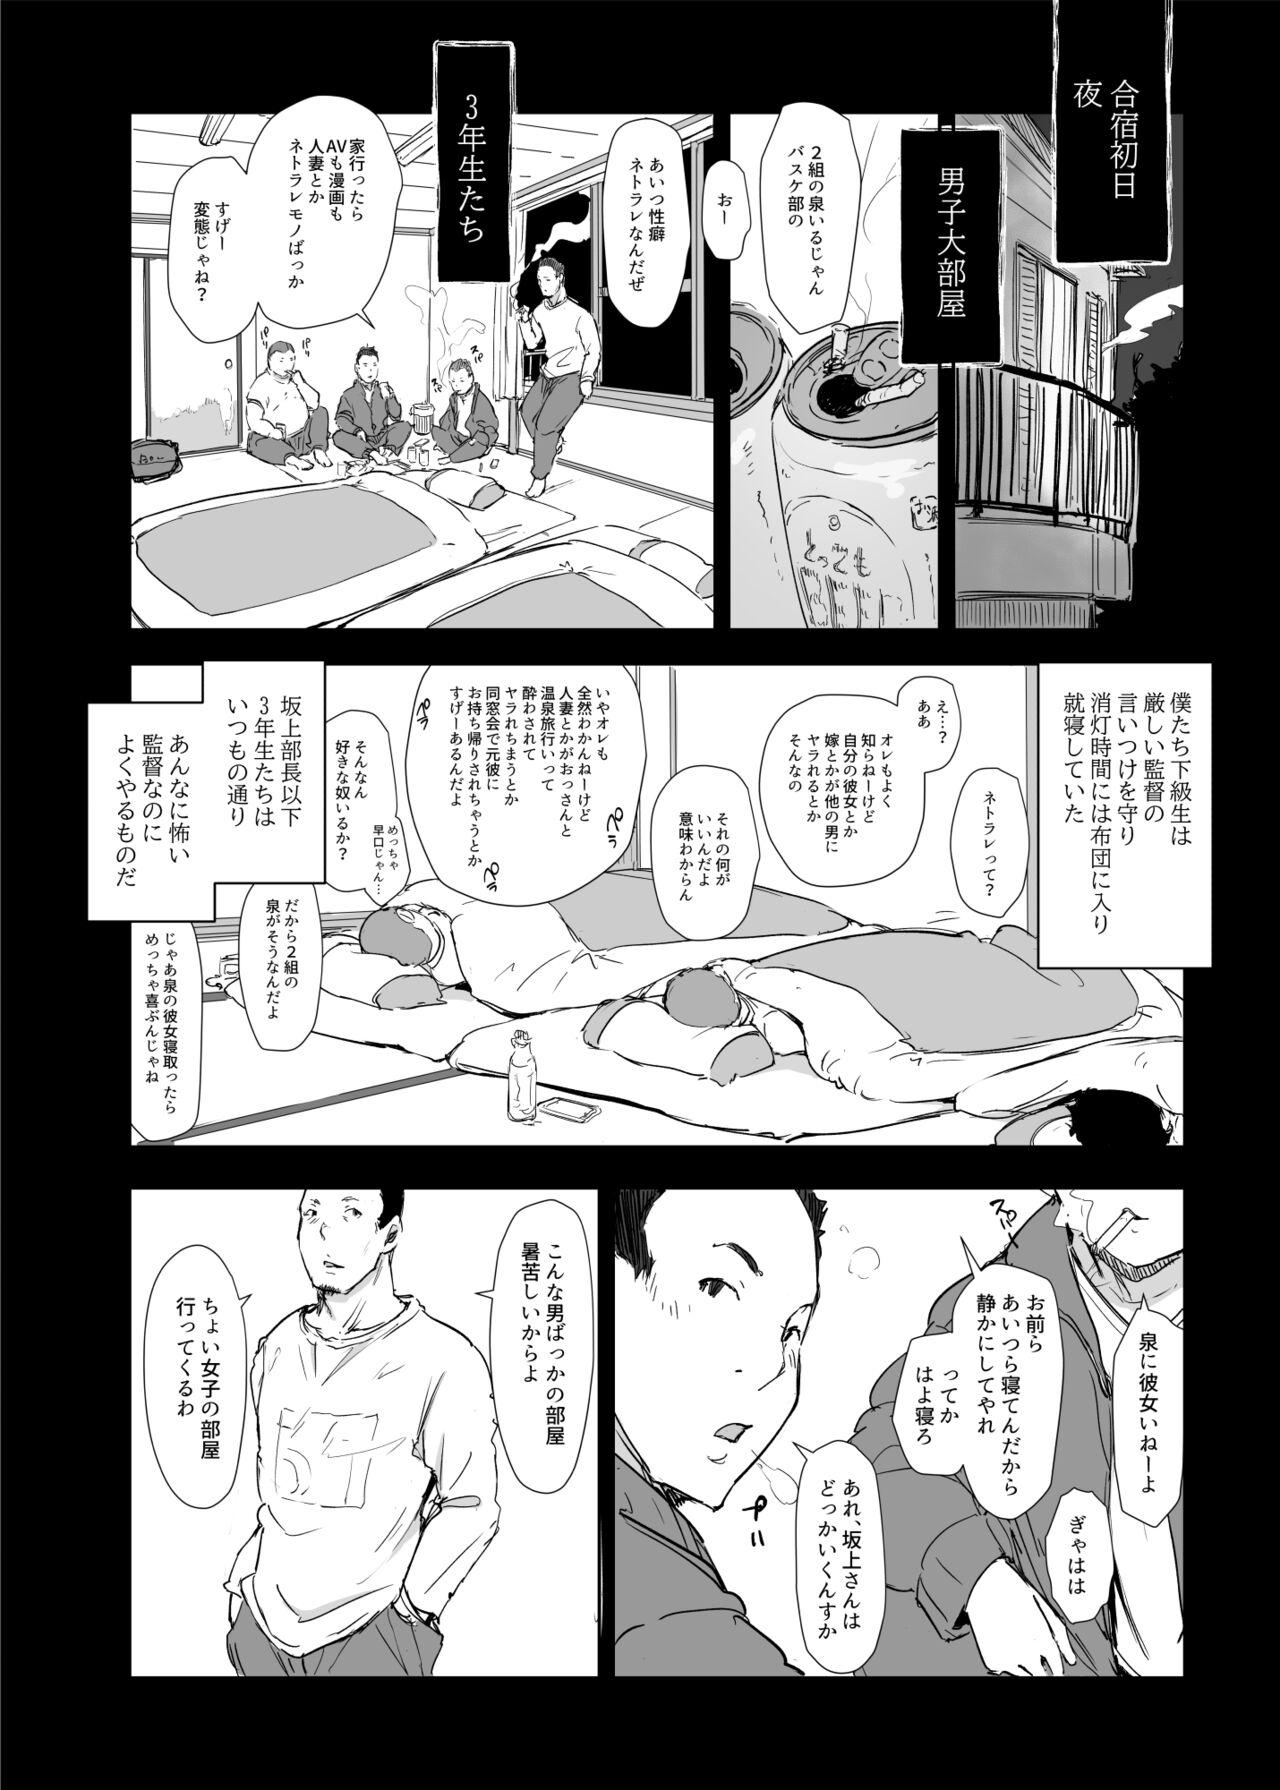 Chacal 僕の彼女は野球部マネージャーver.2.2 - Original Peluda - Page 10